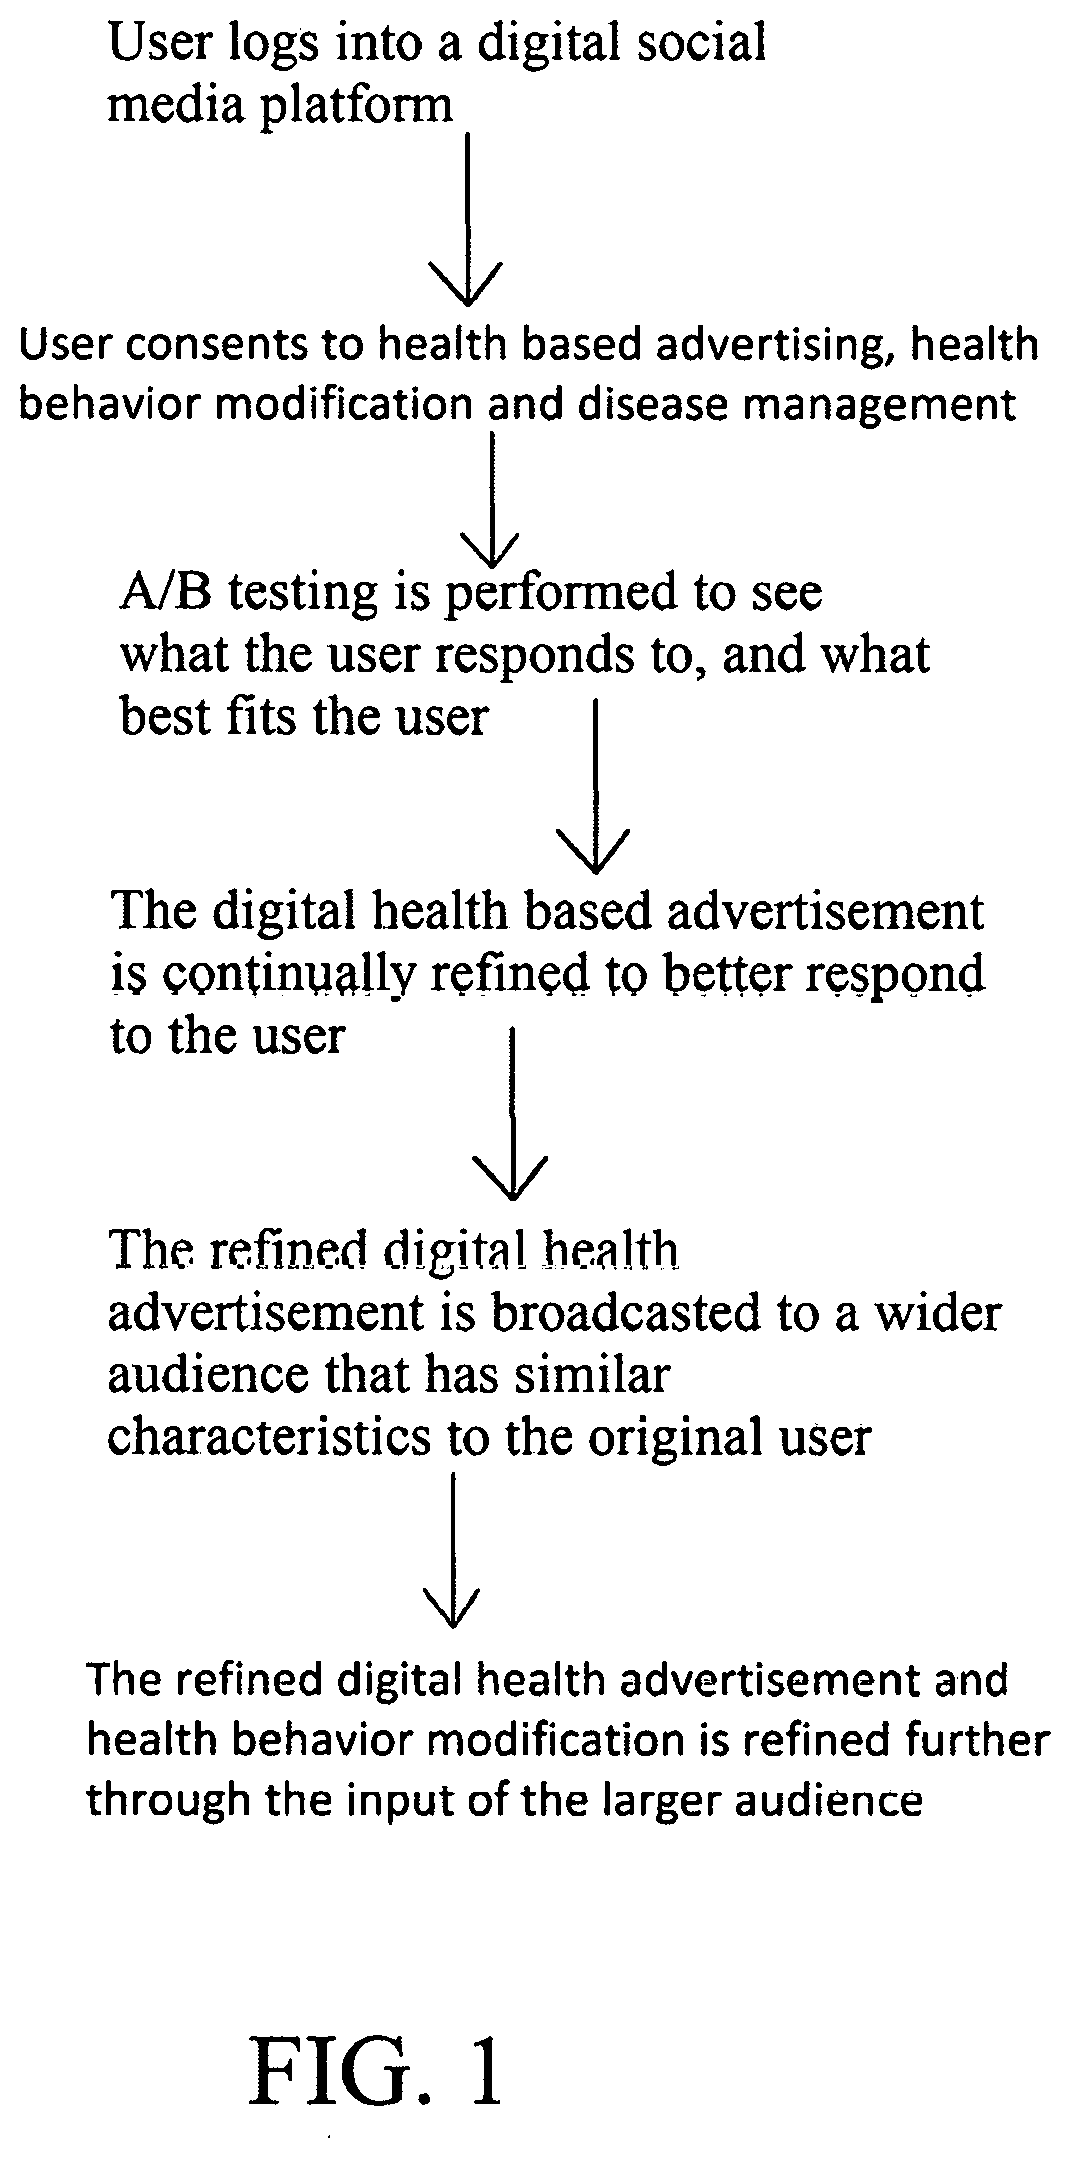 System and method for targeting audiences for health behavior modification using digital advertisements